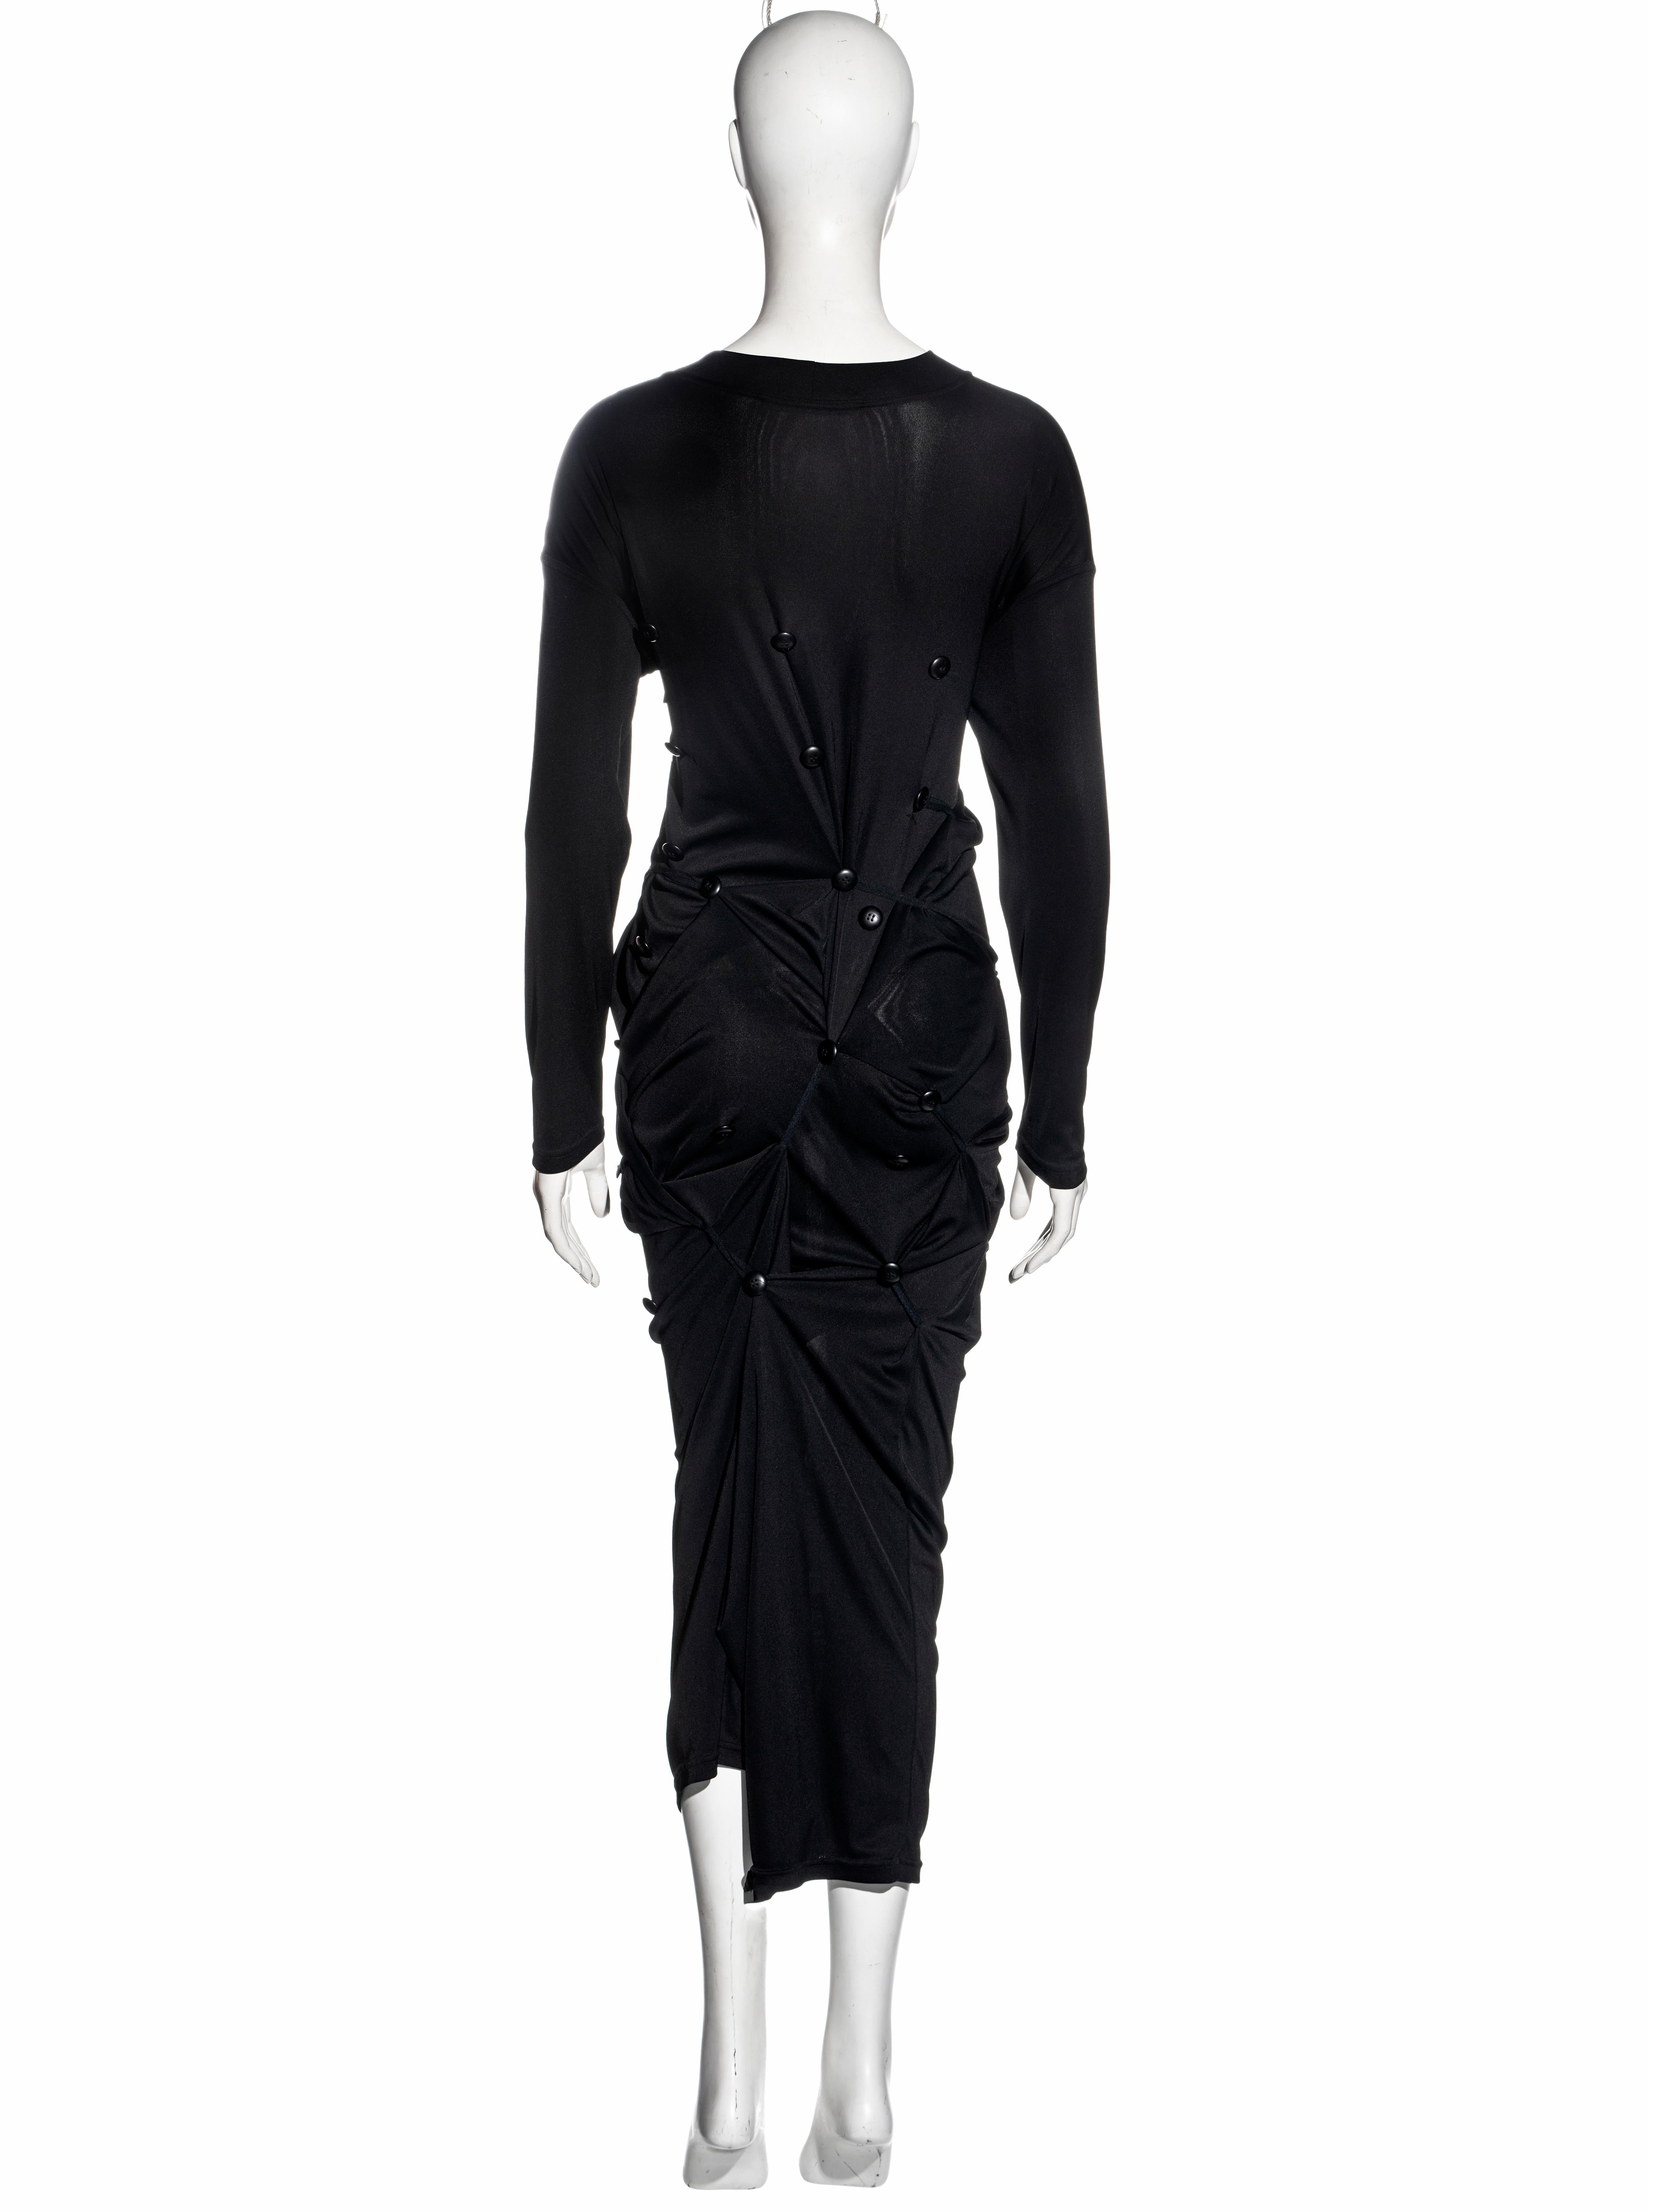 Dolce & Gabbana black jersey maxi dress with adjustable button closures, fw 1987 For Sale 3